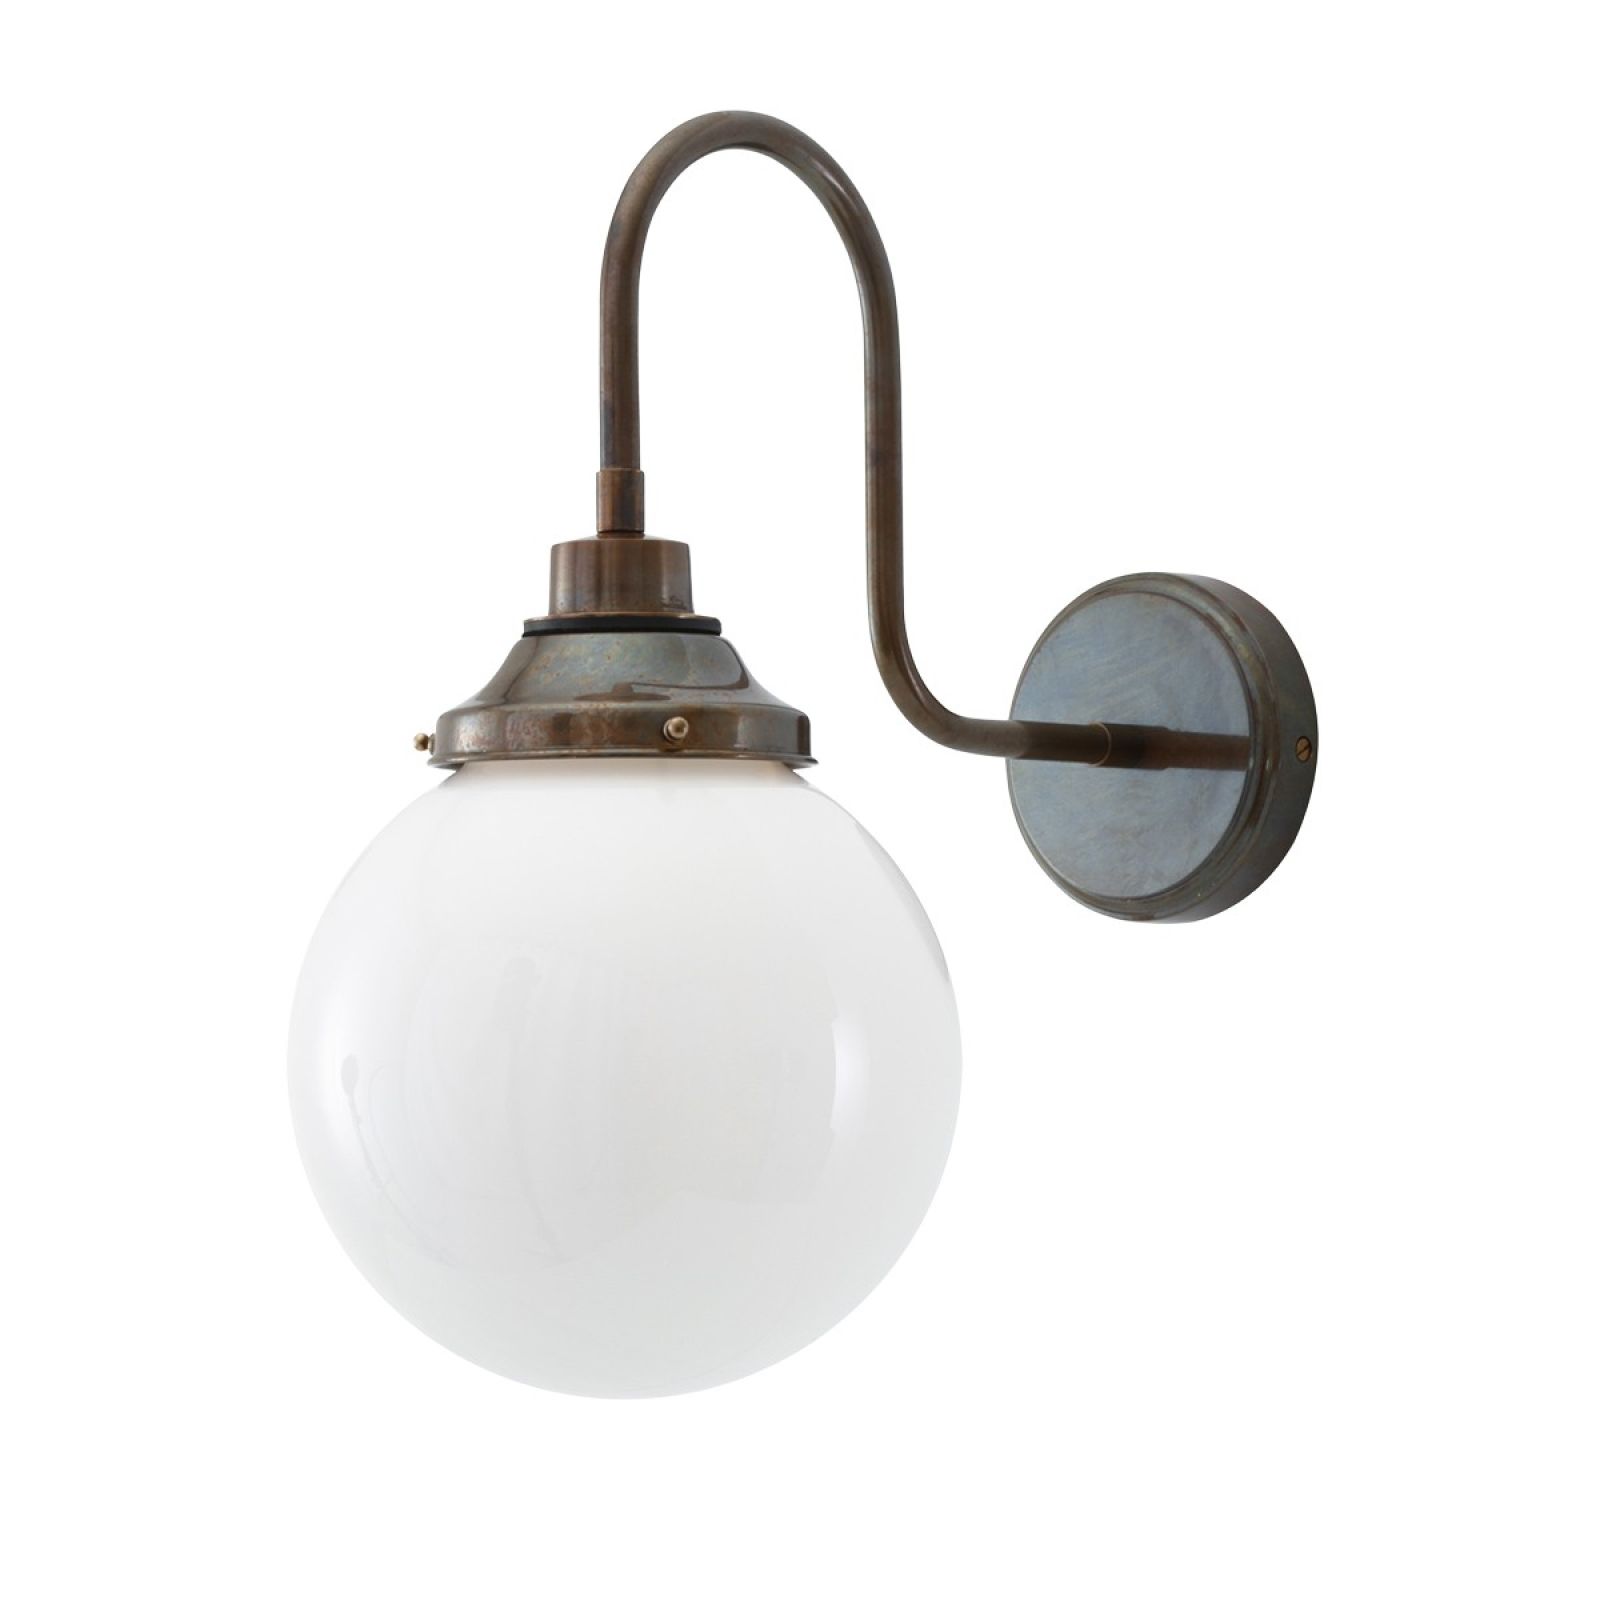 Pelagio Swan Neck Wall Light in a choice of 3 sizes